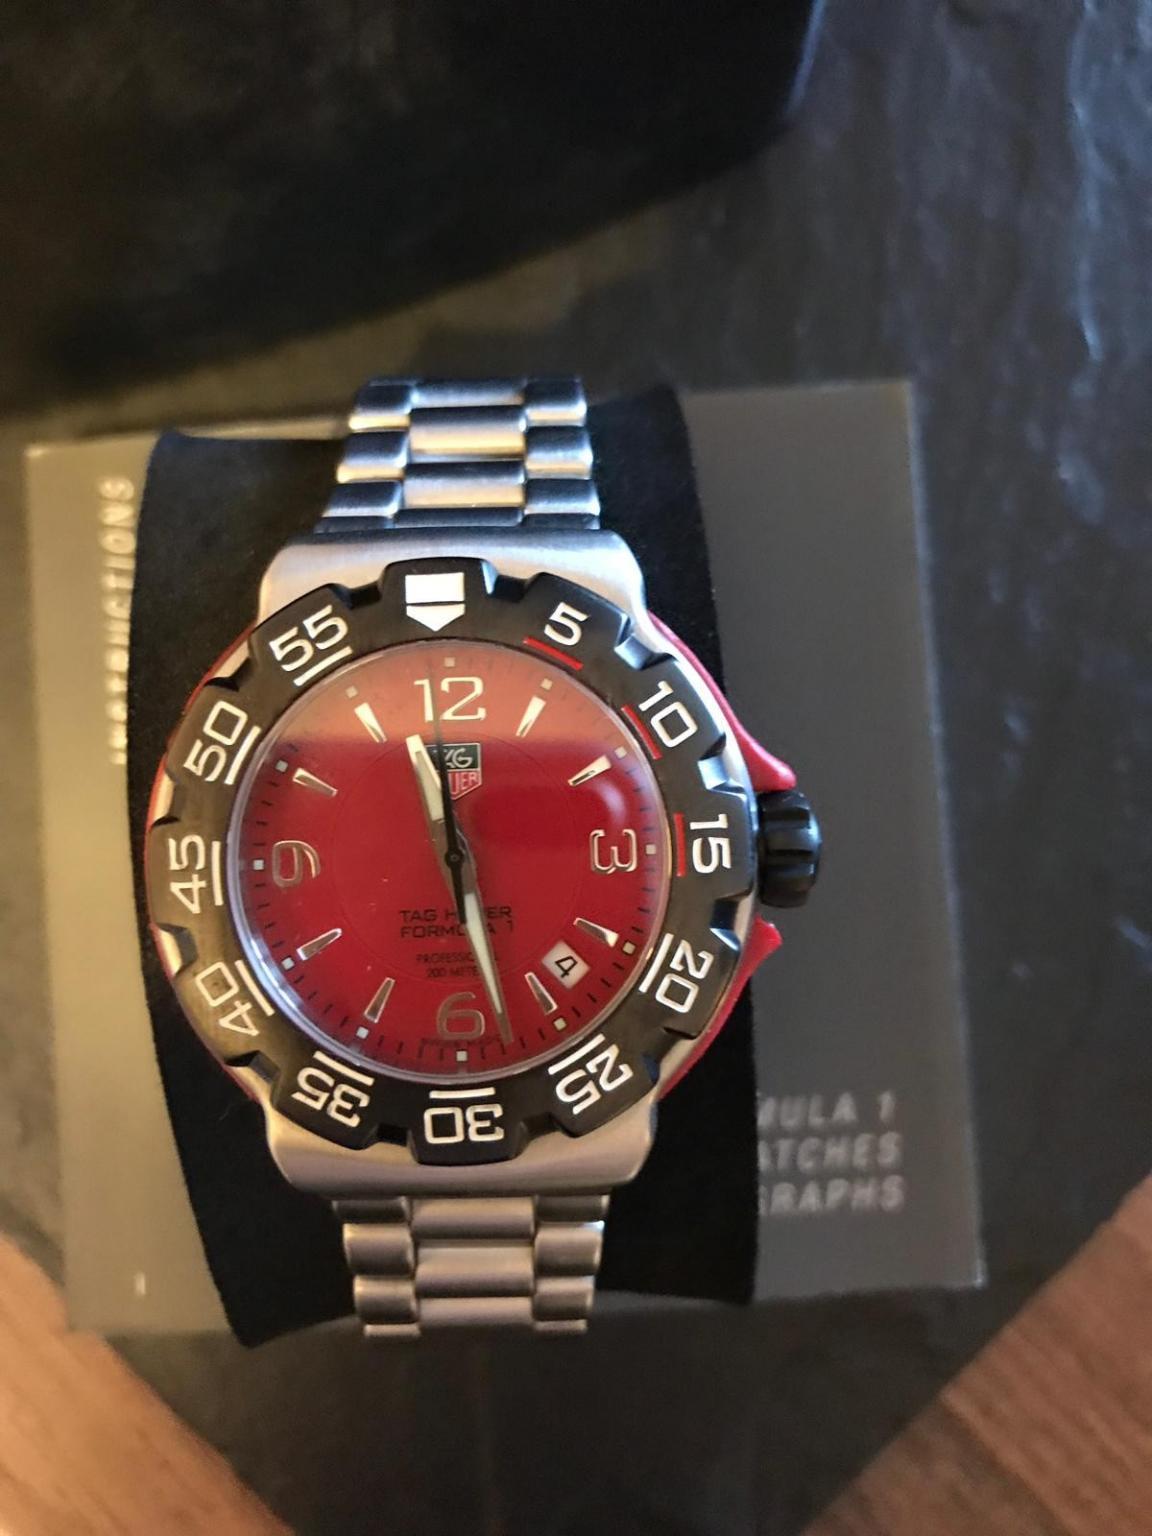 Tag heuer formula 1 red face watch in BS48 Tickenham for £300.00 for